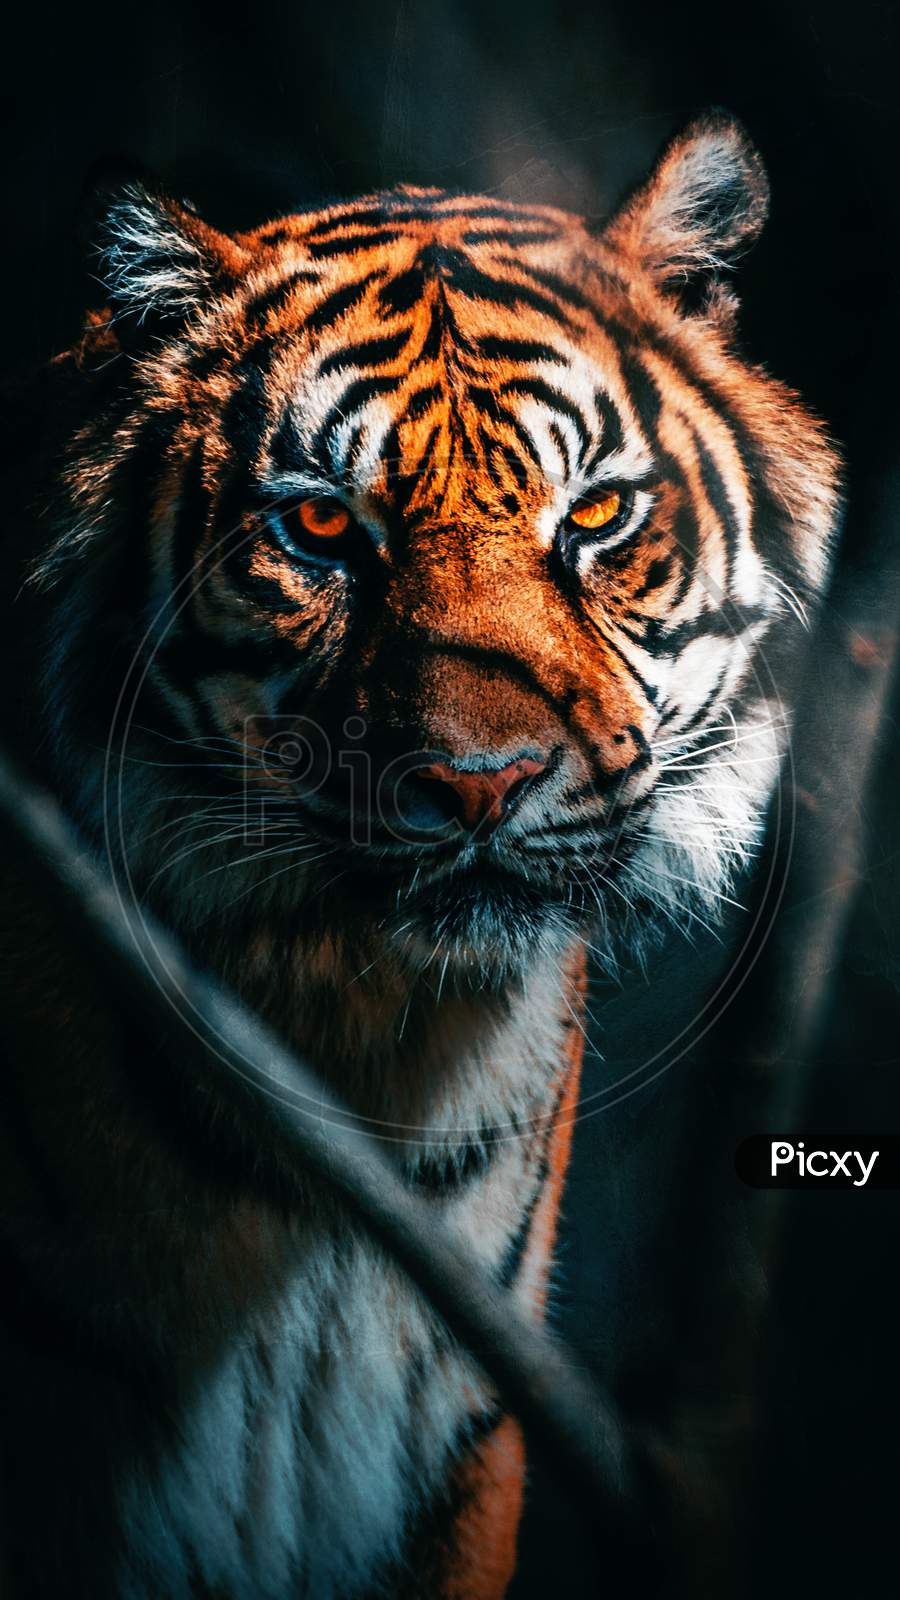 HD wallpaper A Stunning Tiger deadly danger awesome animal dark 3d  and abstract  Wallpaper Flare